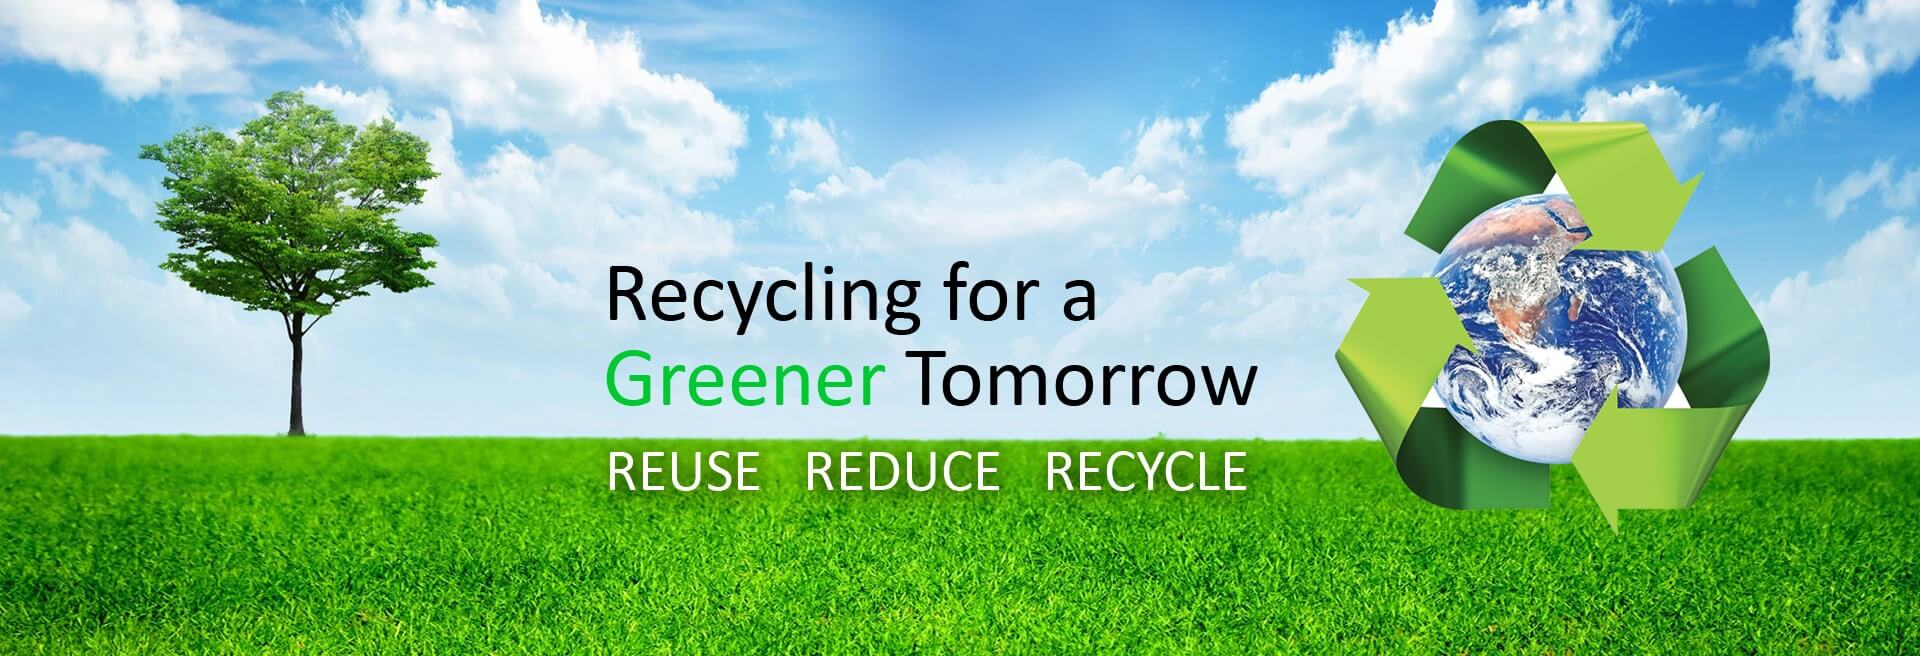 recycling for a greener tomorrow